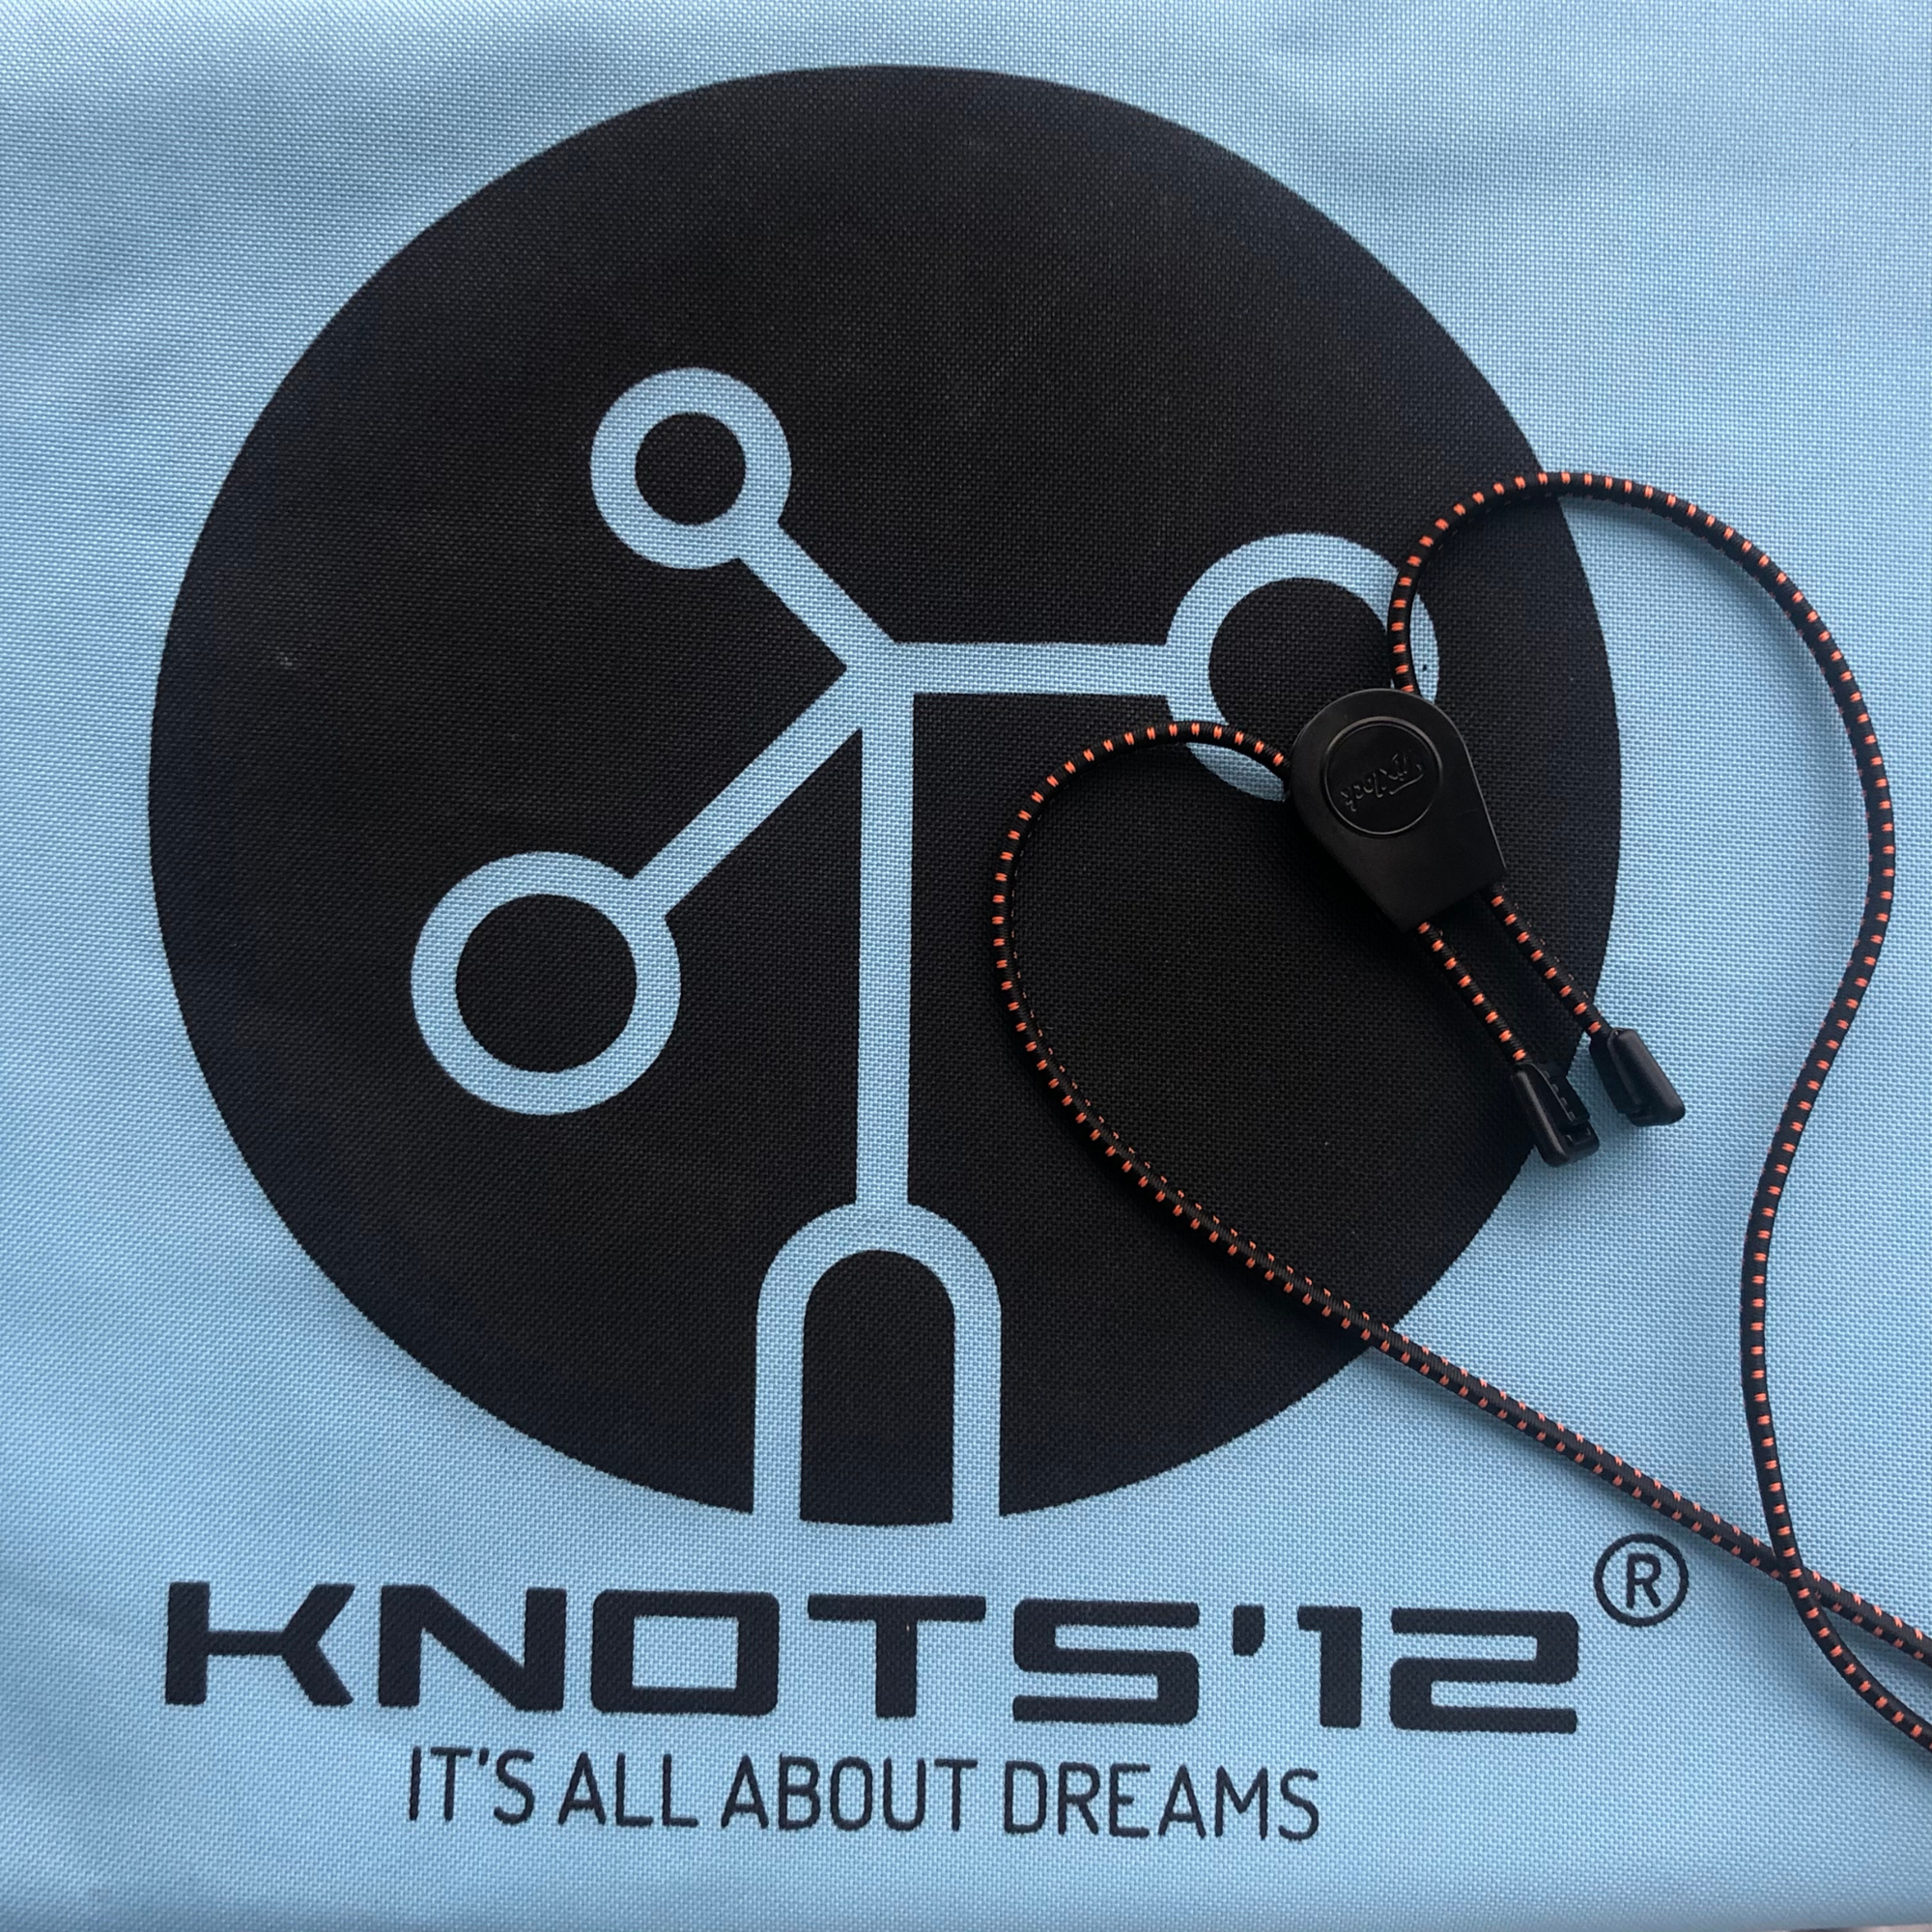 Knots12 high quality boat covers for Optimist, Zoom8 and ILCA 7 dingy. 